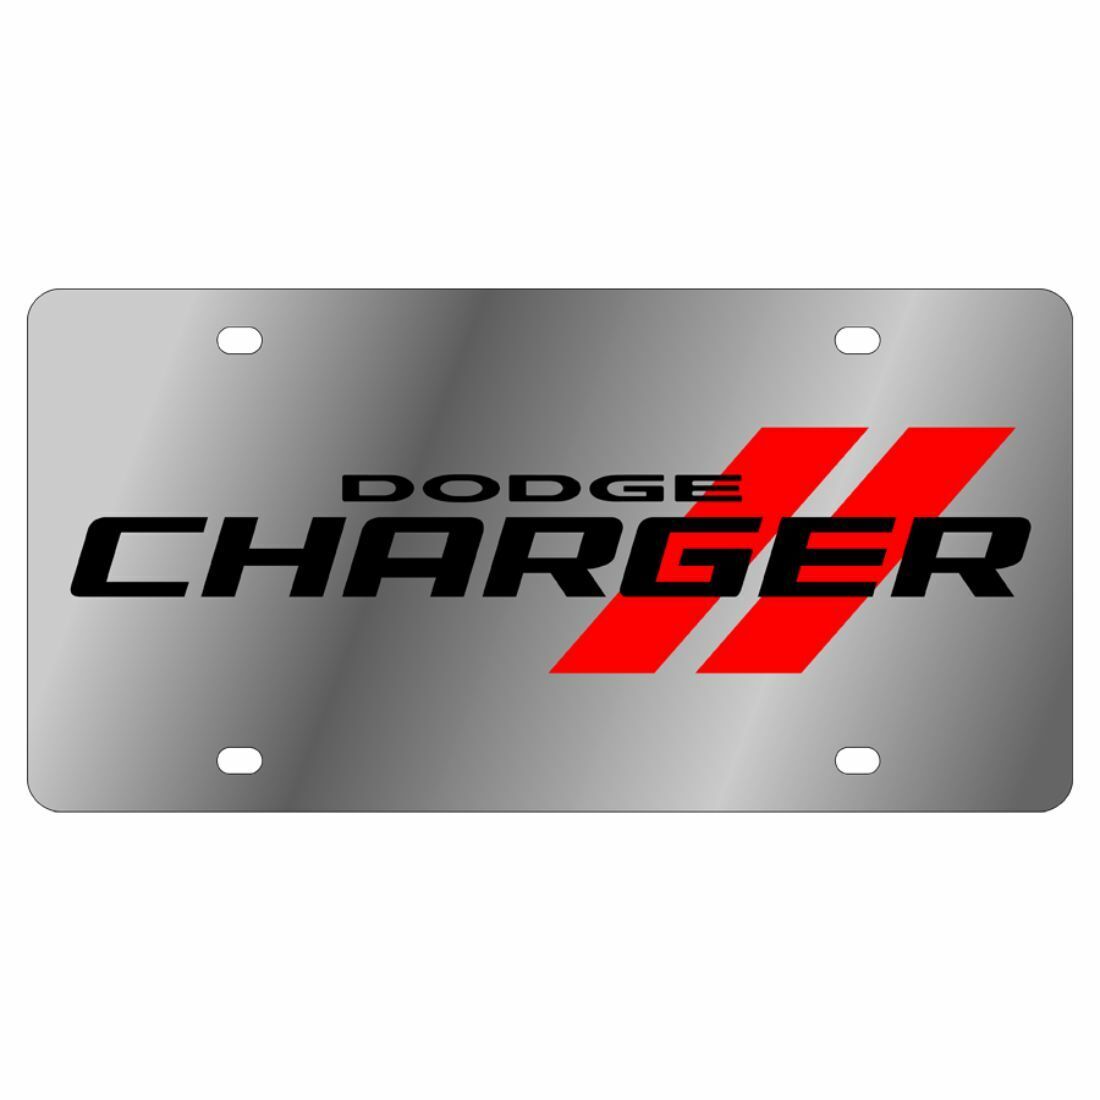 Stainless Steel Plate Charger Stripes Black Red License Plate Frame 3D Novelty